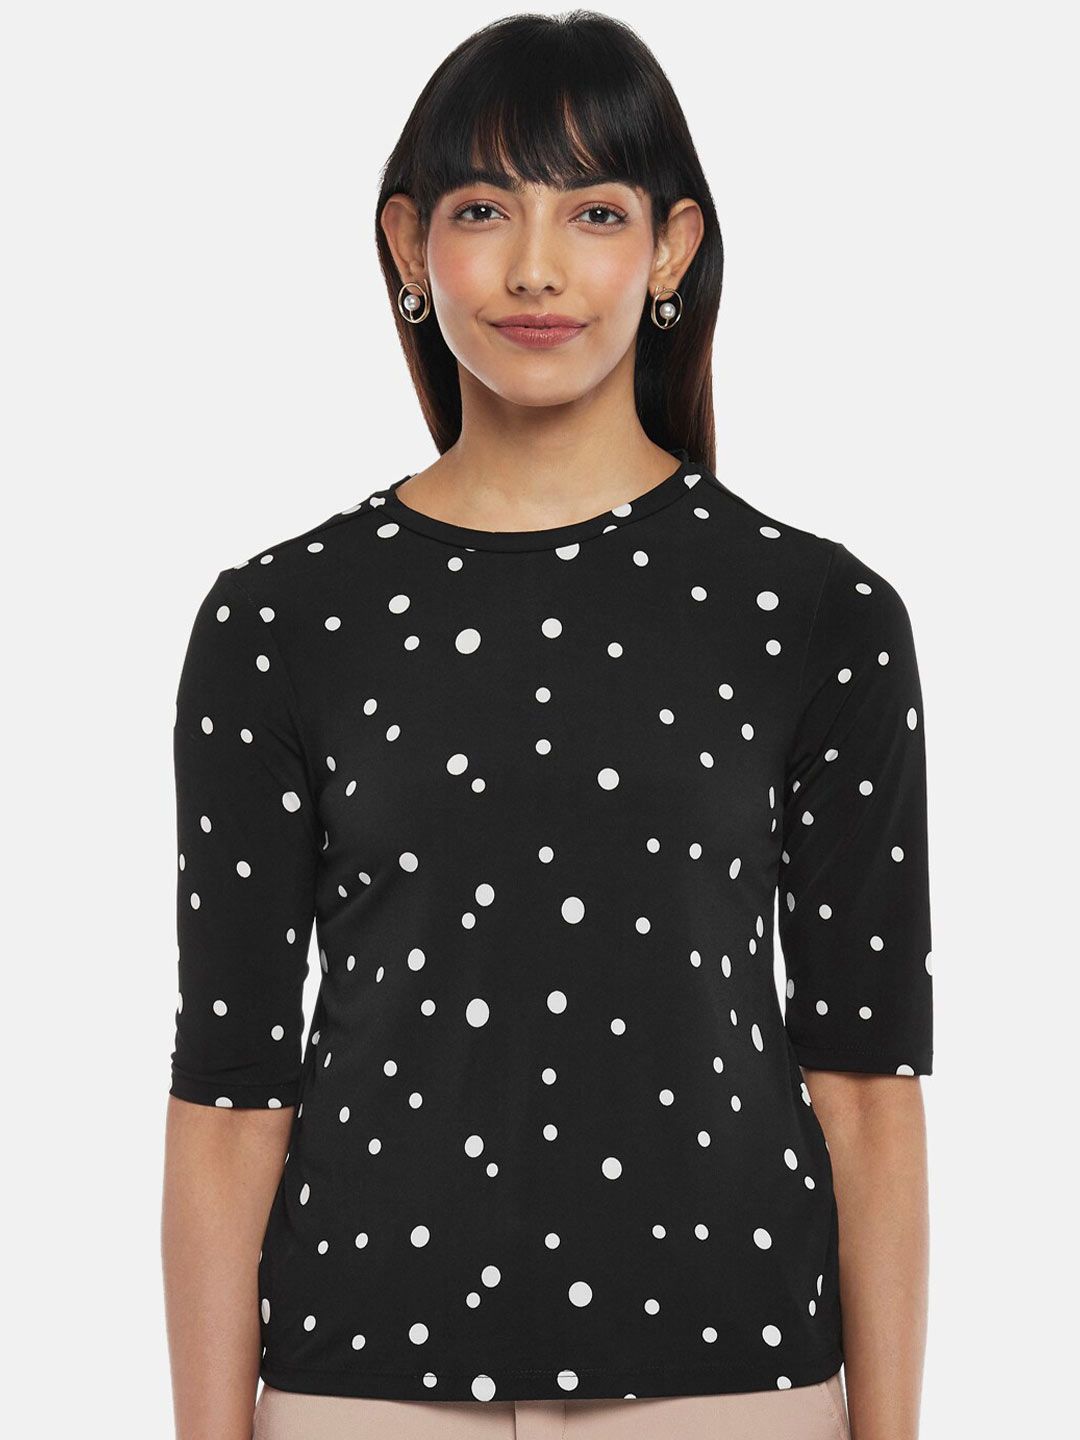 Annabelle by Pantaloons Women Black Polka Dots Print Top Price in India